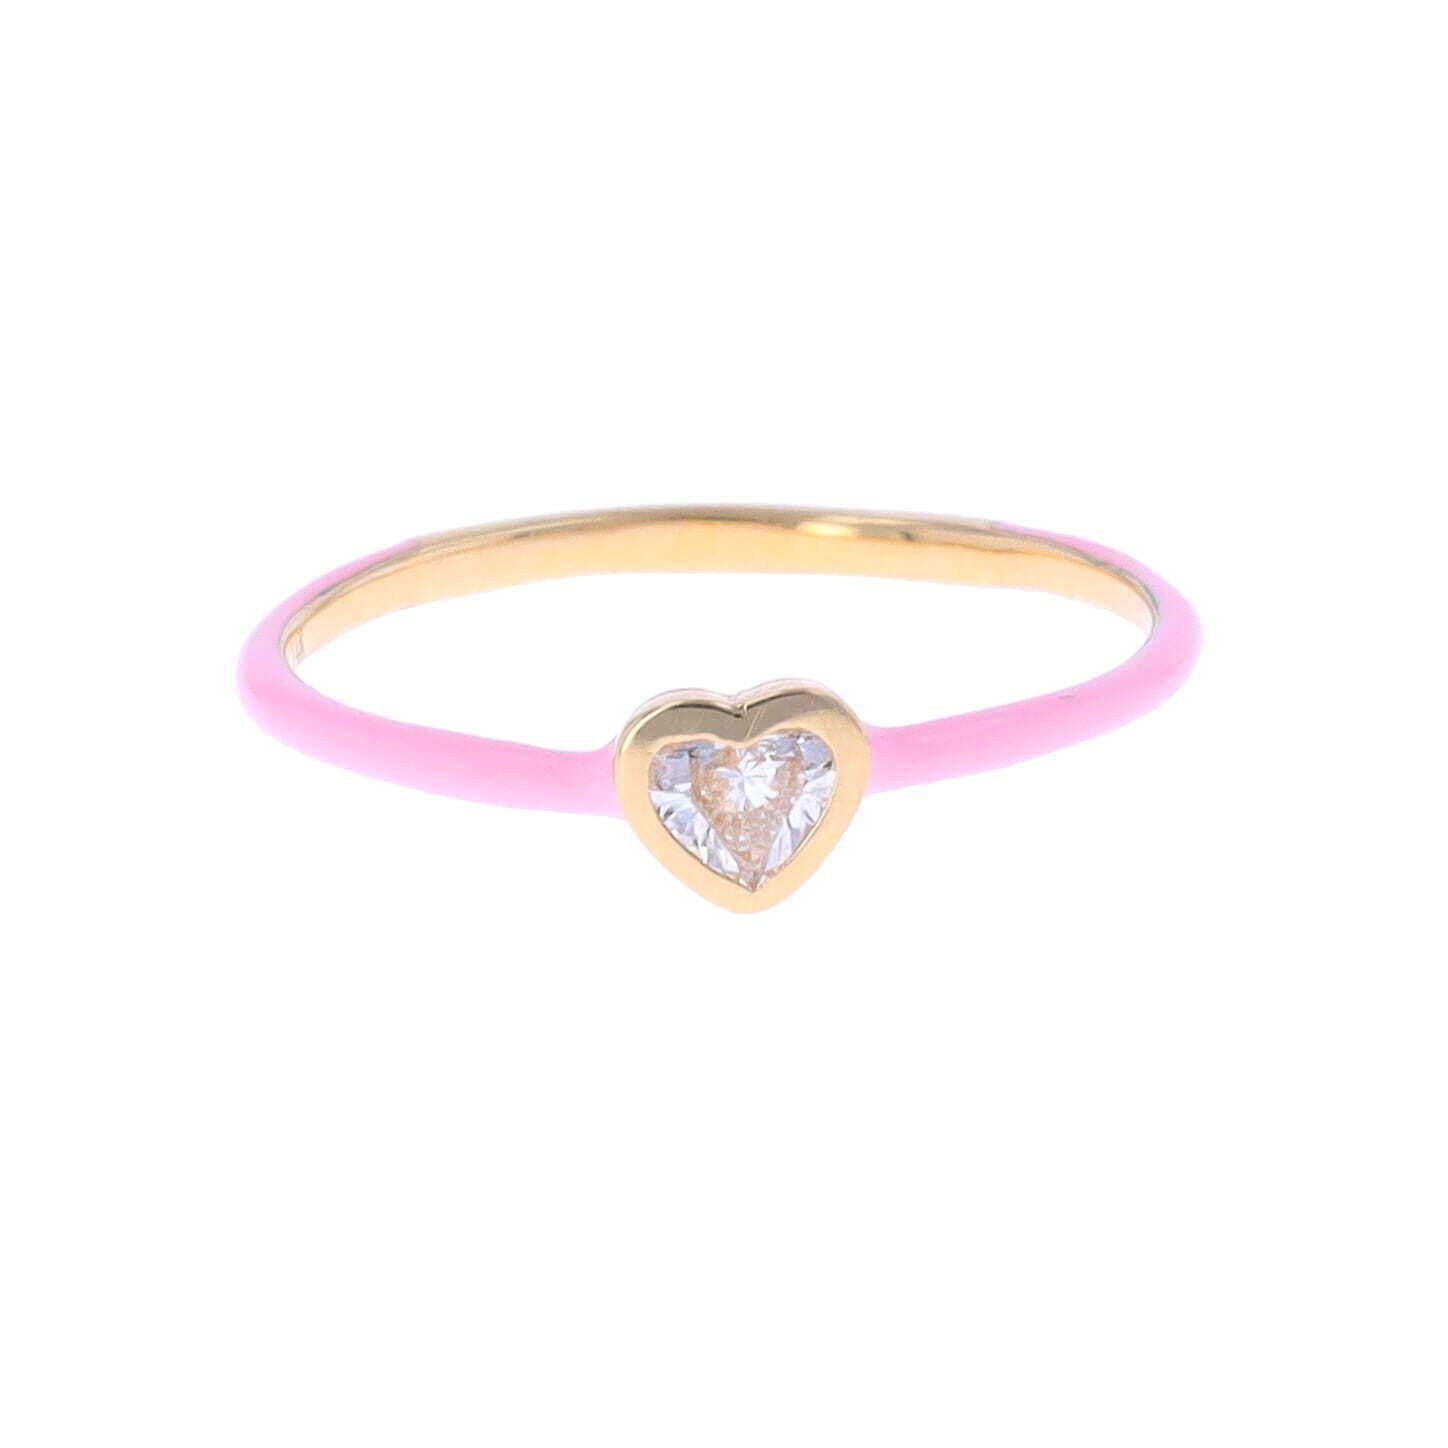 14k & Pink Enamel Stack Band with Heart Shaped Diamond Center